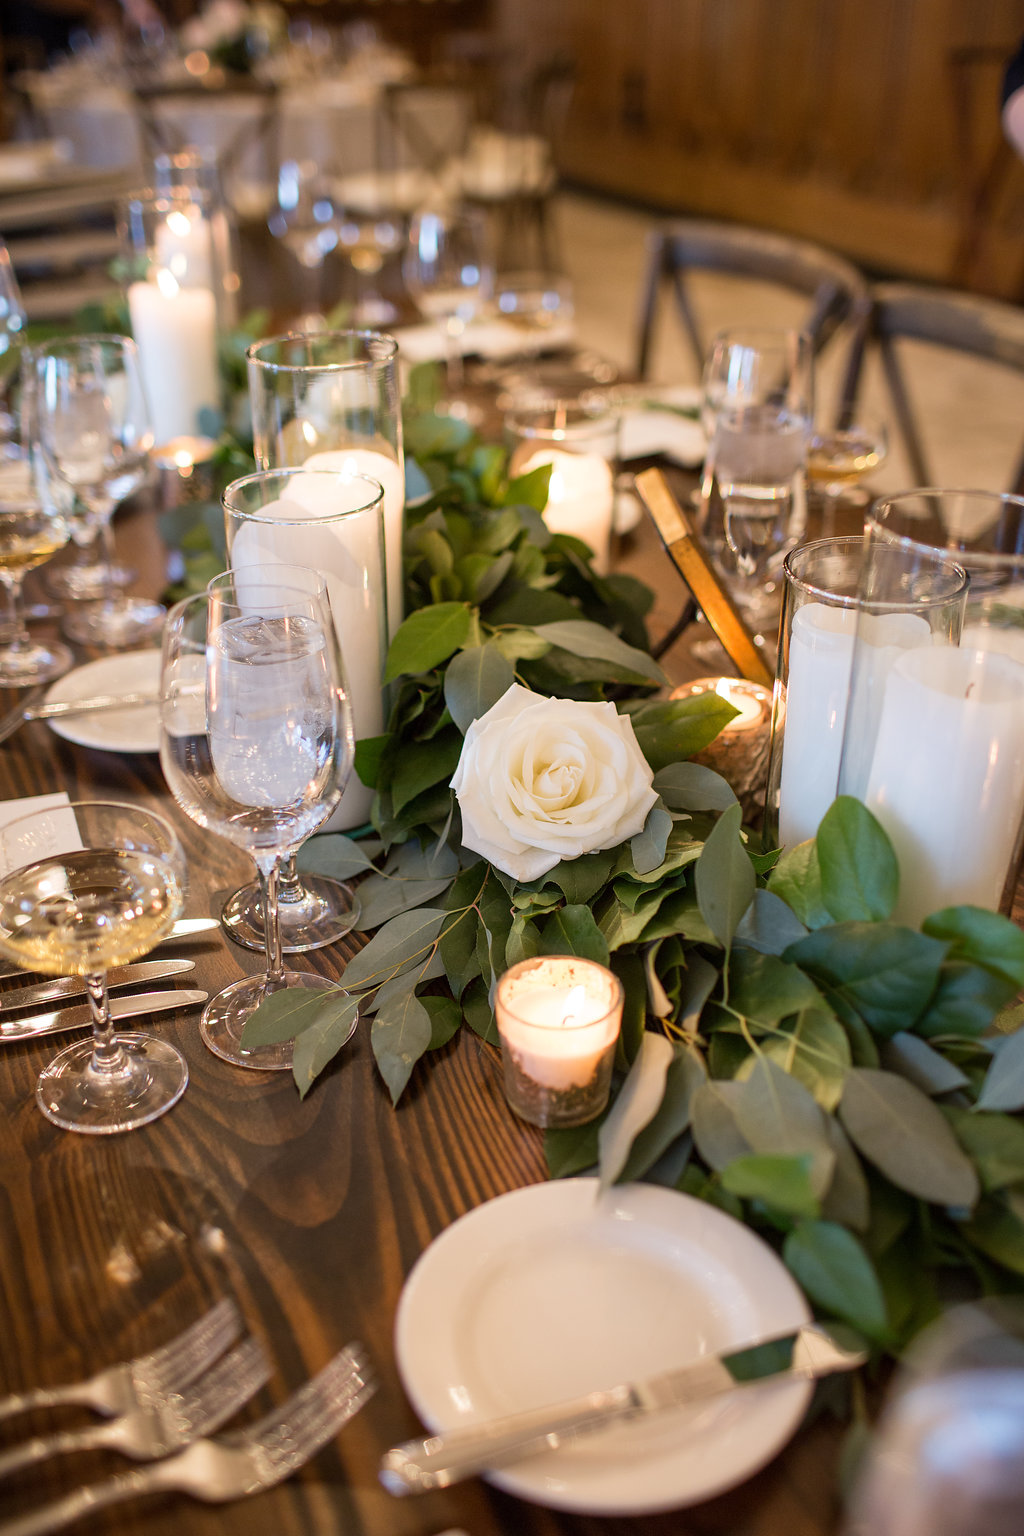 Chicago Athletic Association spring wedding reception with foliage garland and pillar candles.